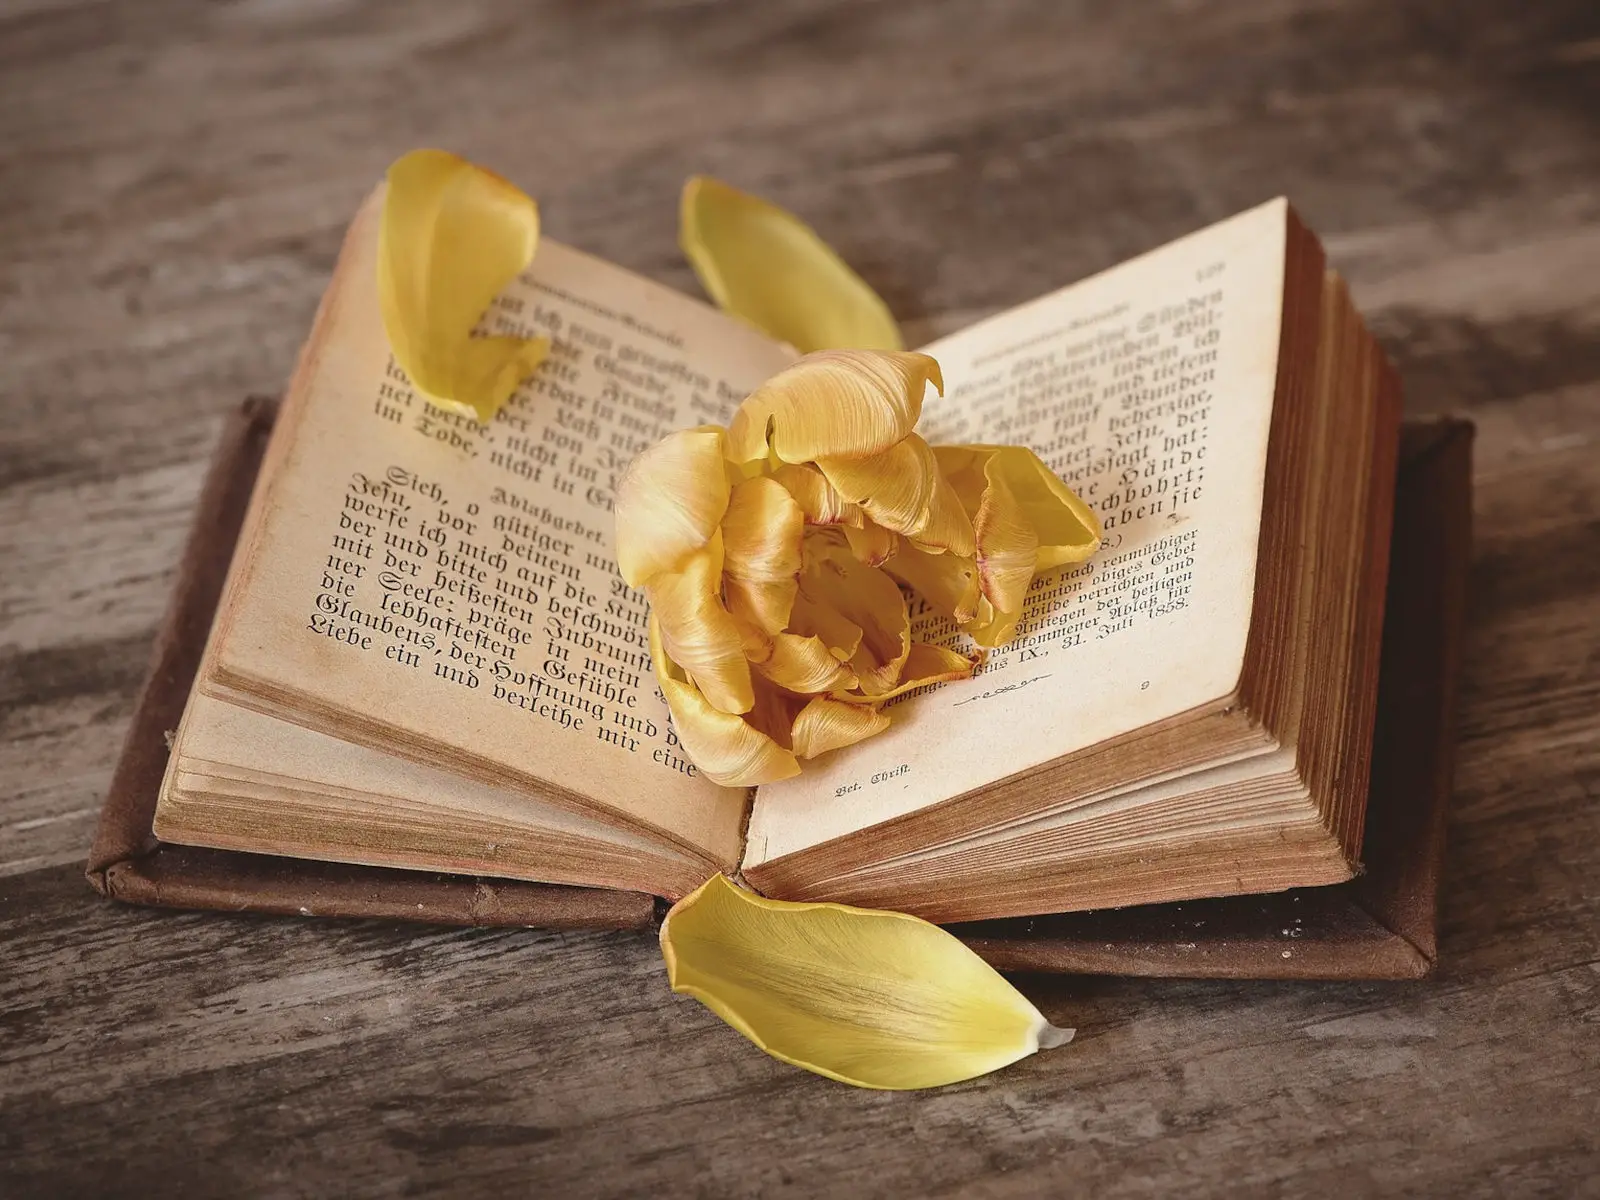 old book with flower petals in it